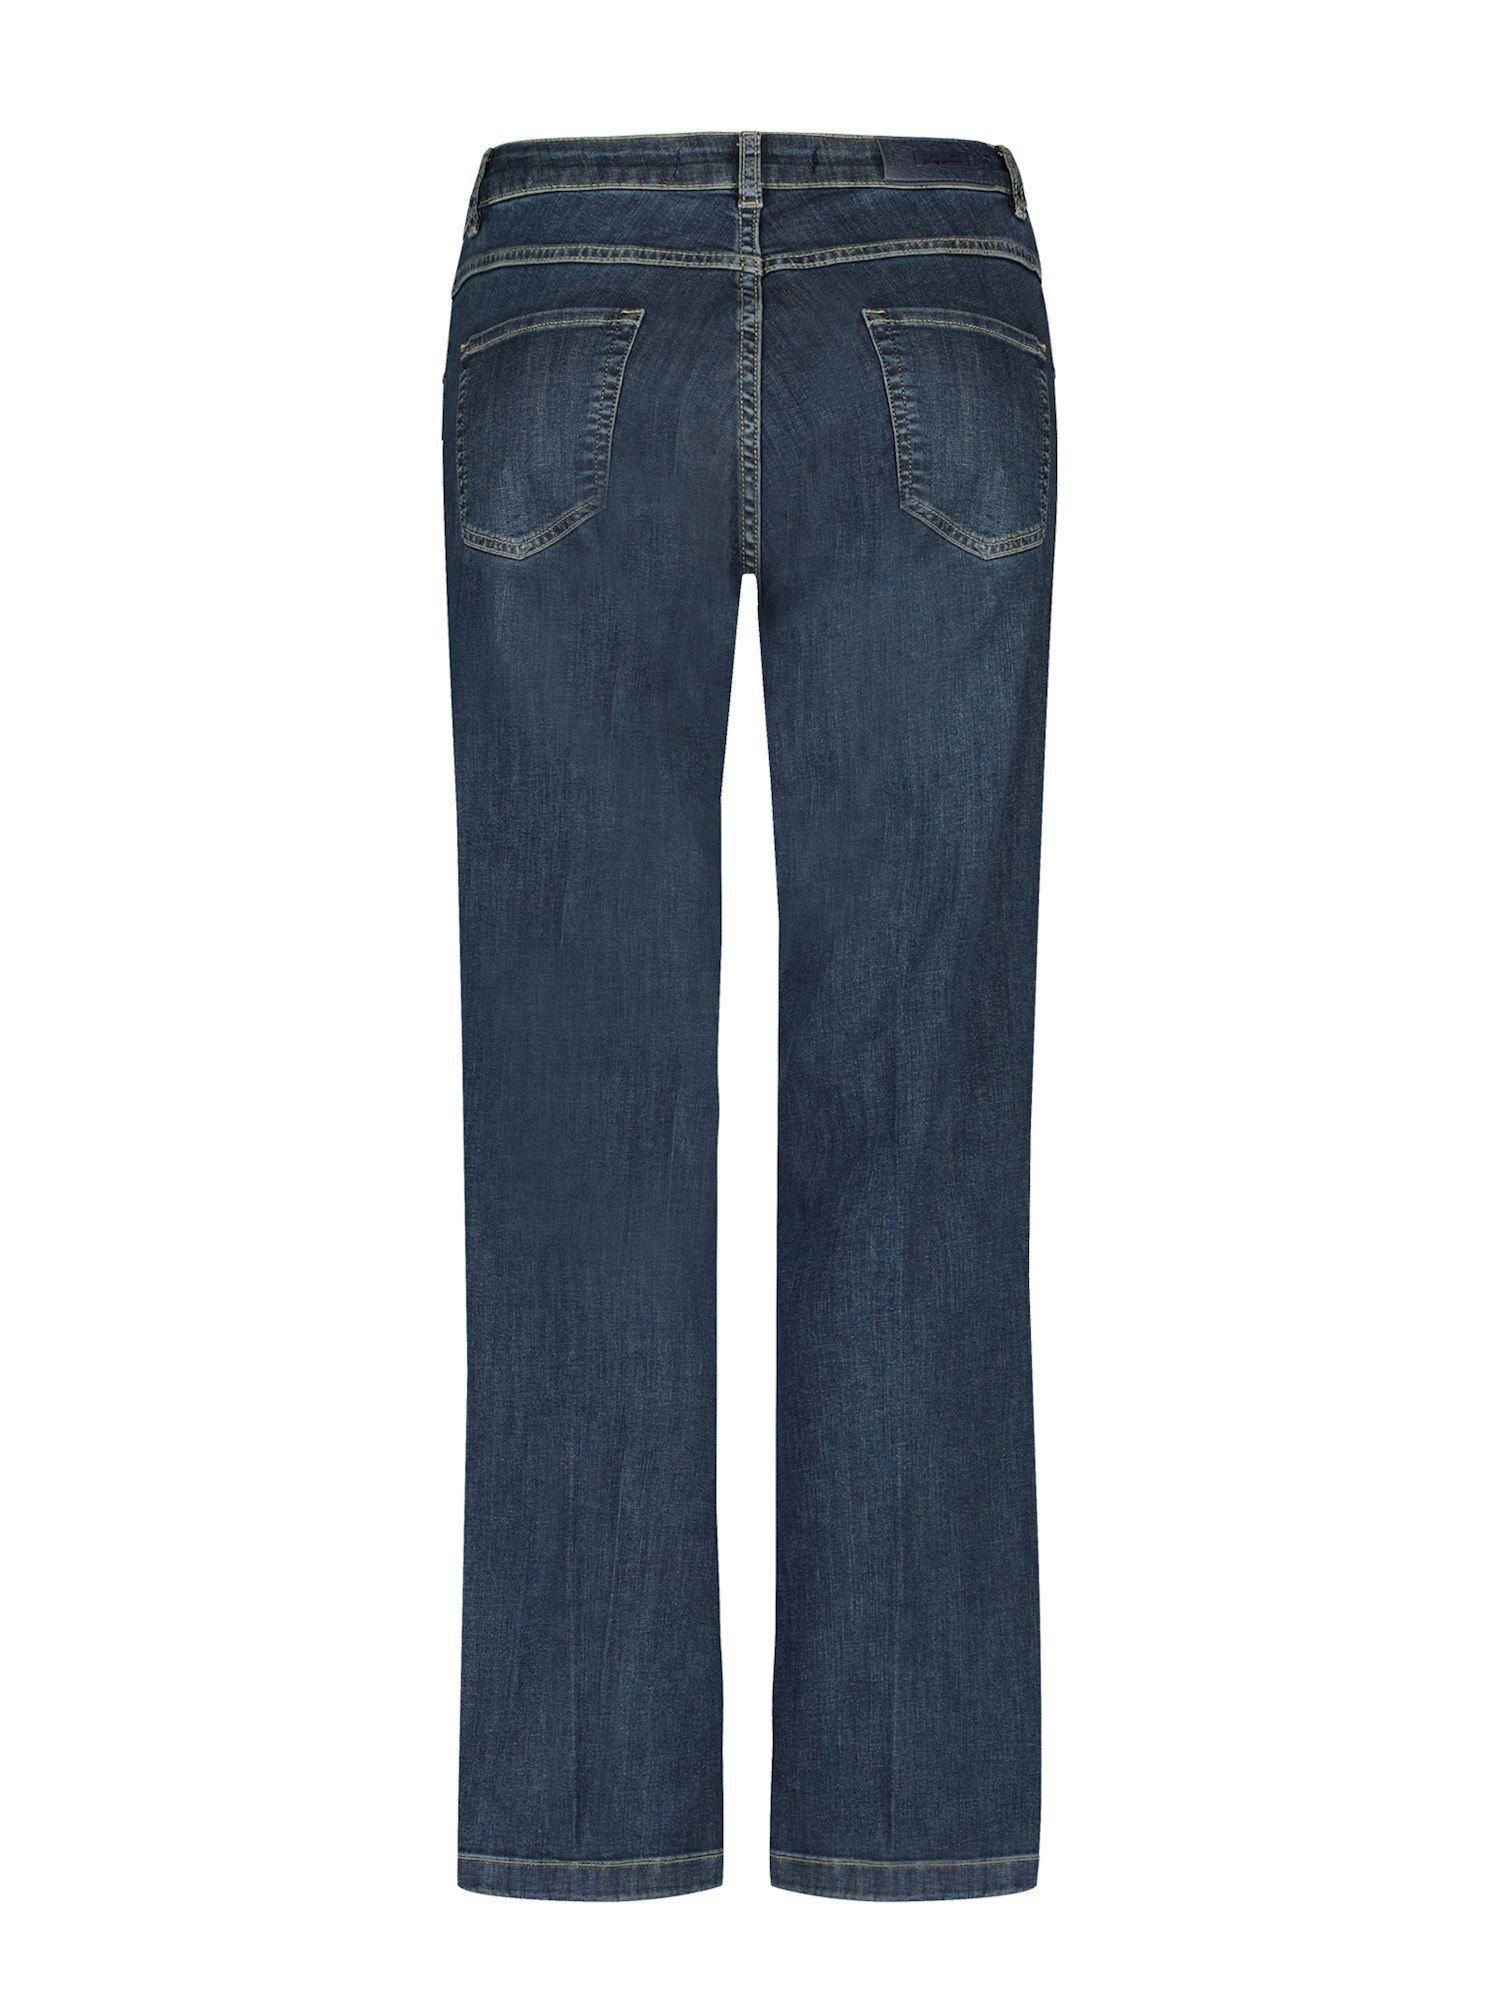 Eve Daily Denims - Old Blue